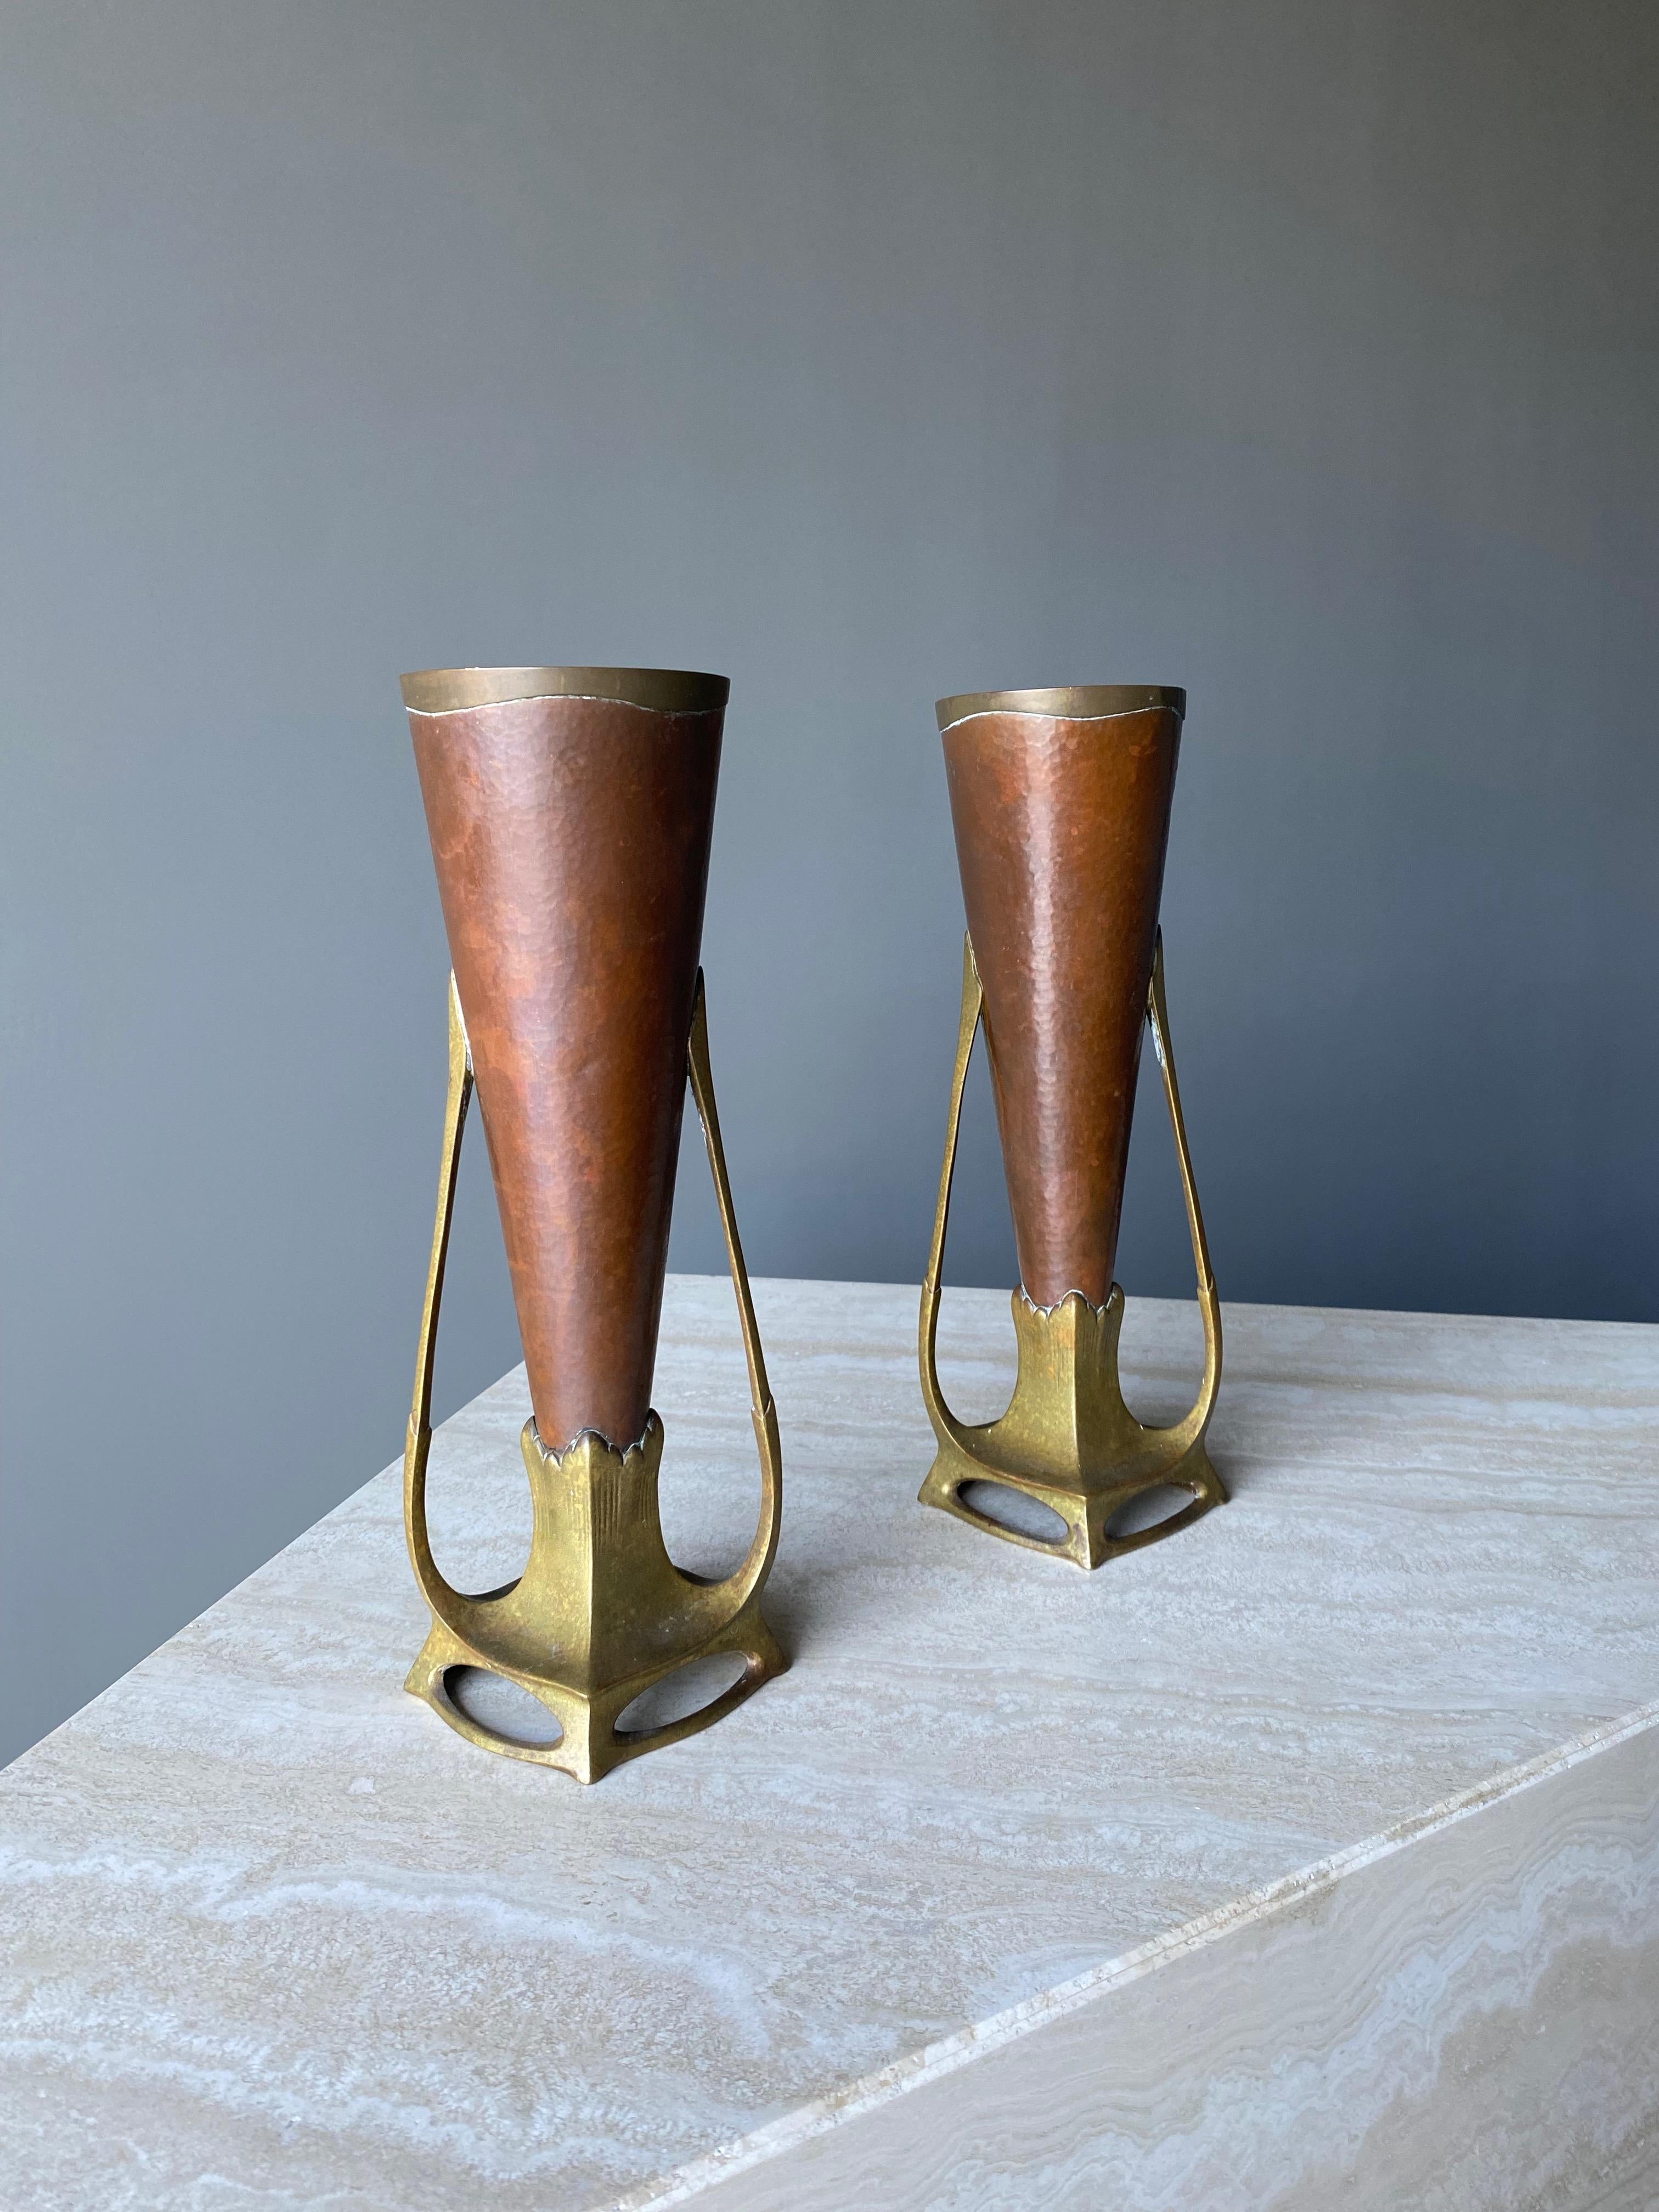 Carl Deffner Pair of Hammered Copper & Cast Bronze Vases, Germany, circa 1900 For Sale 11